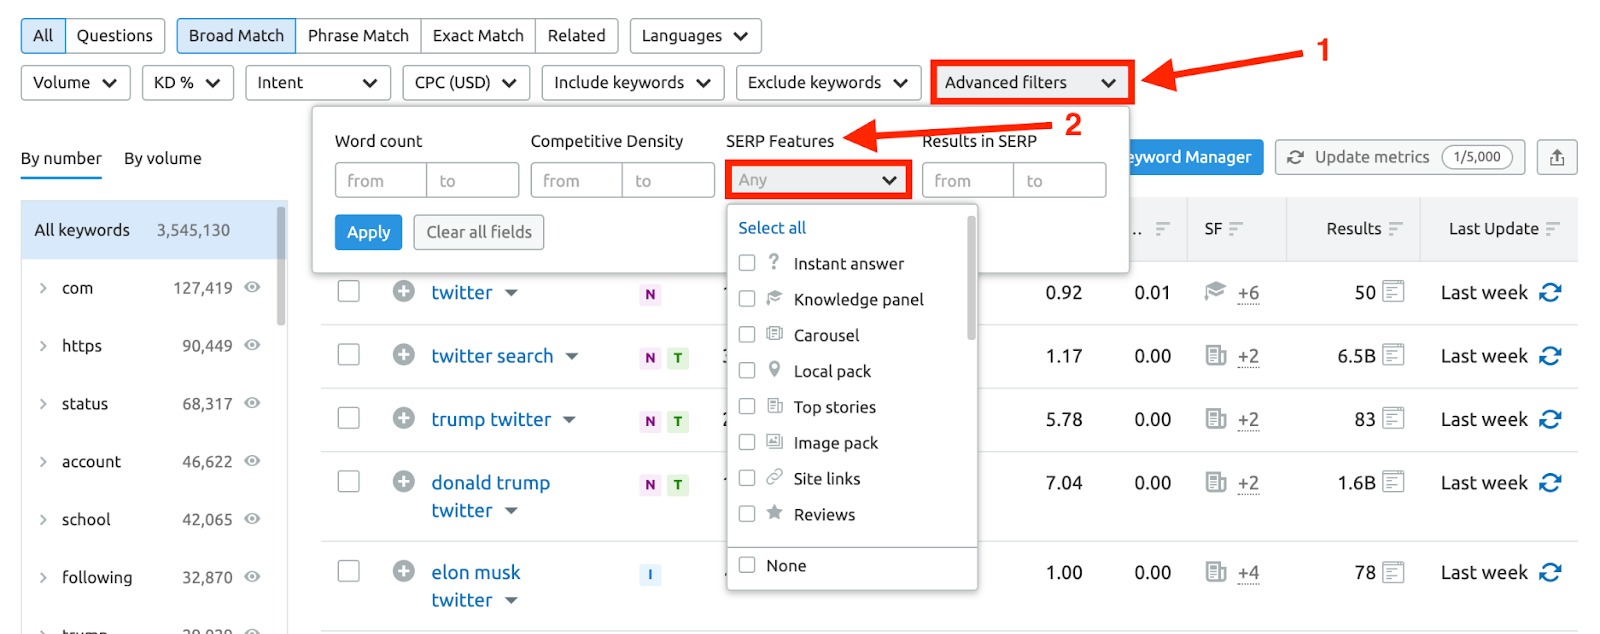 What Semrush Tools Can I Use to Research SERP Features? image 4